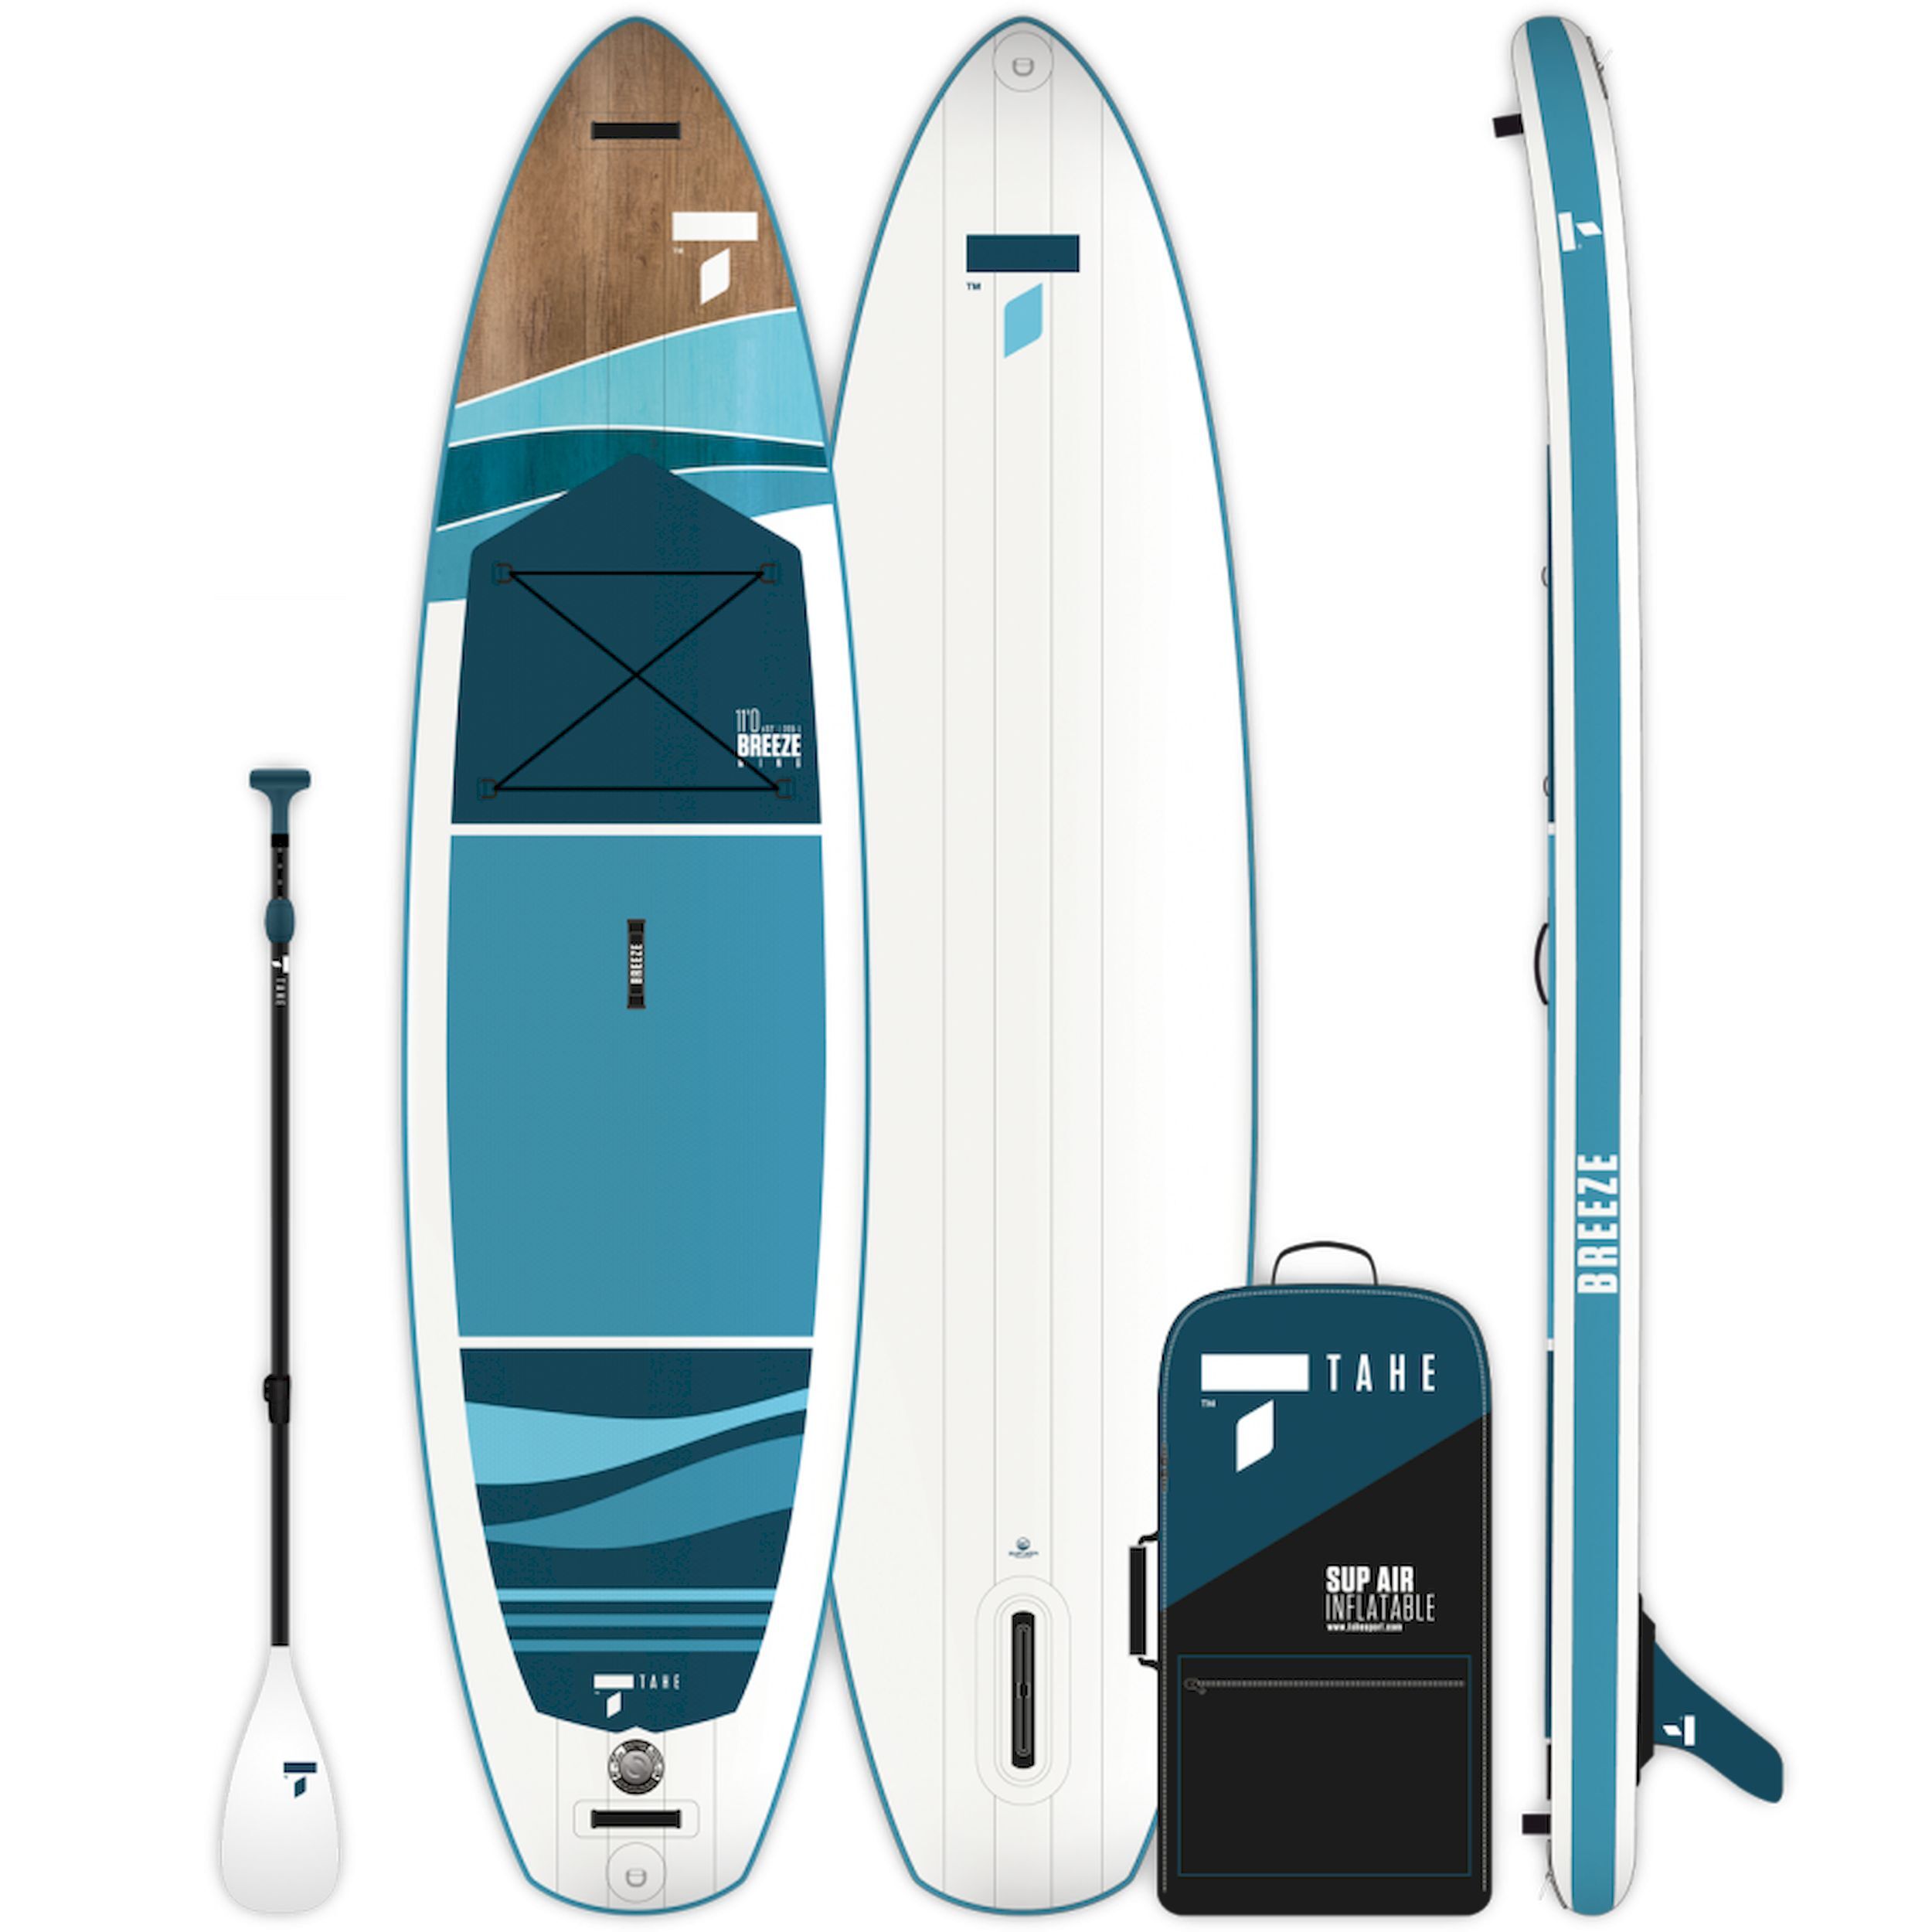 https://images.hardloop.fr/344671/tahe-outdoor-sup-air-11-0-breeze-wing-pack-aufblasbares-sup.jpg?w=auto&h=auto&q=80